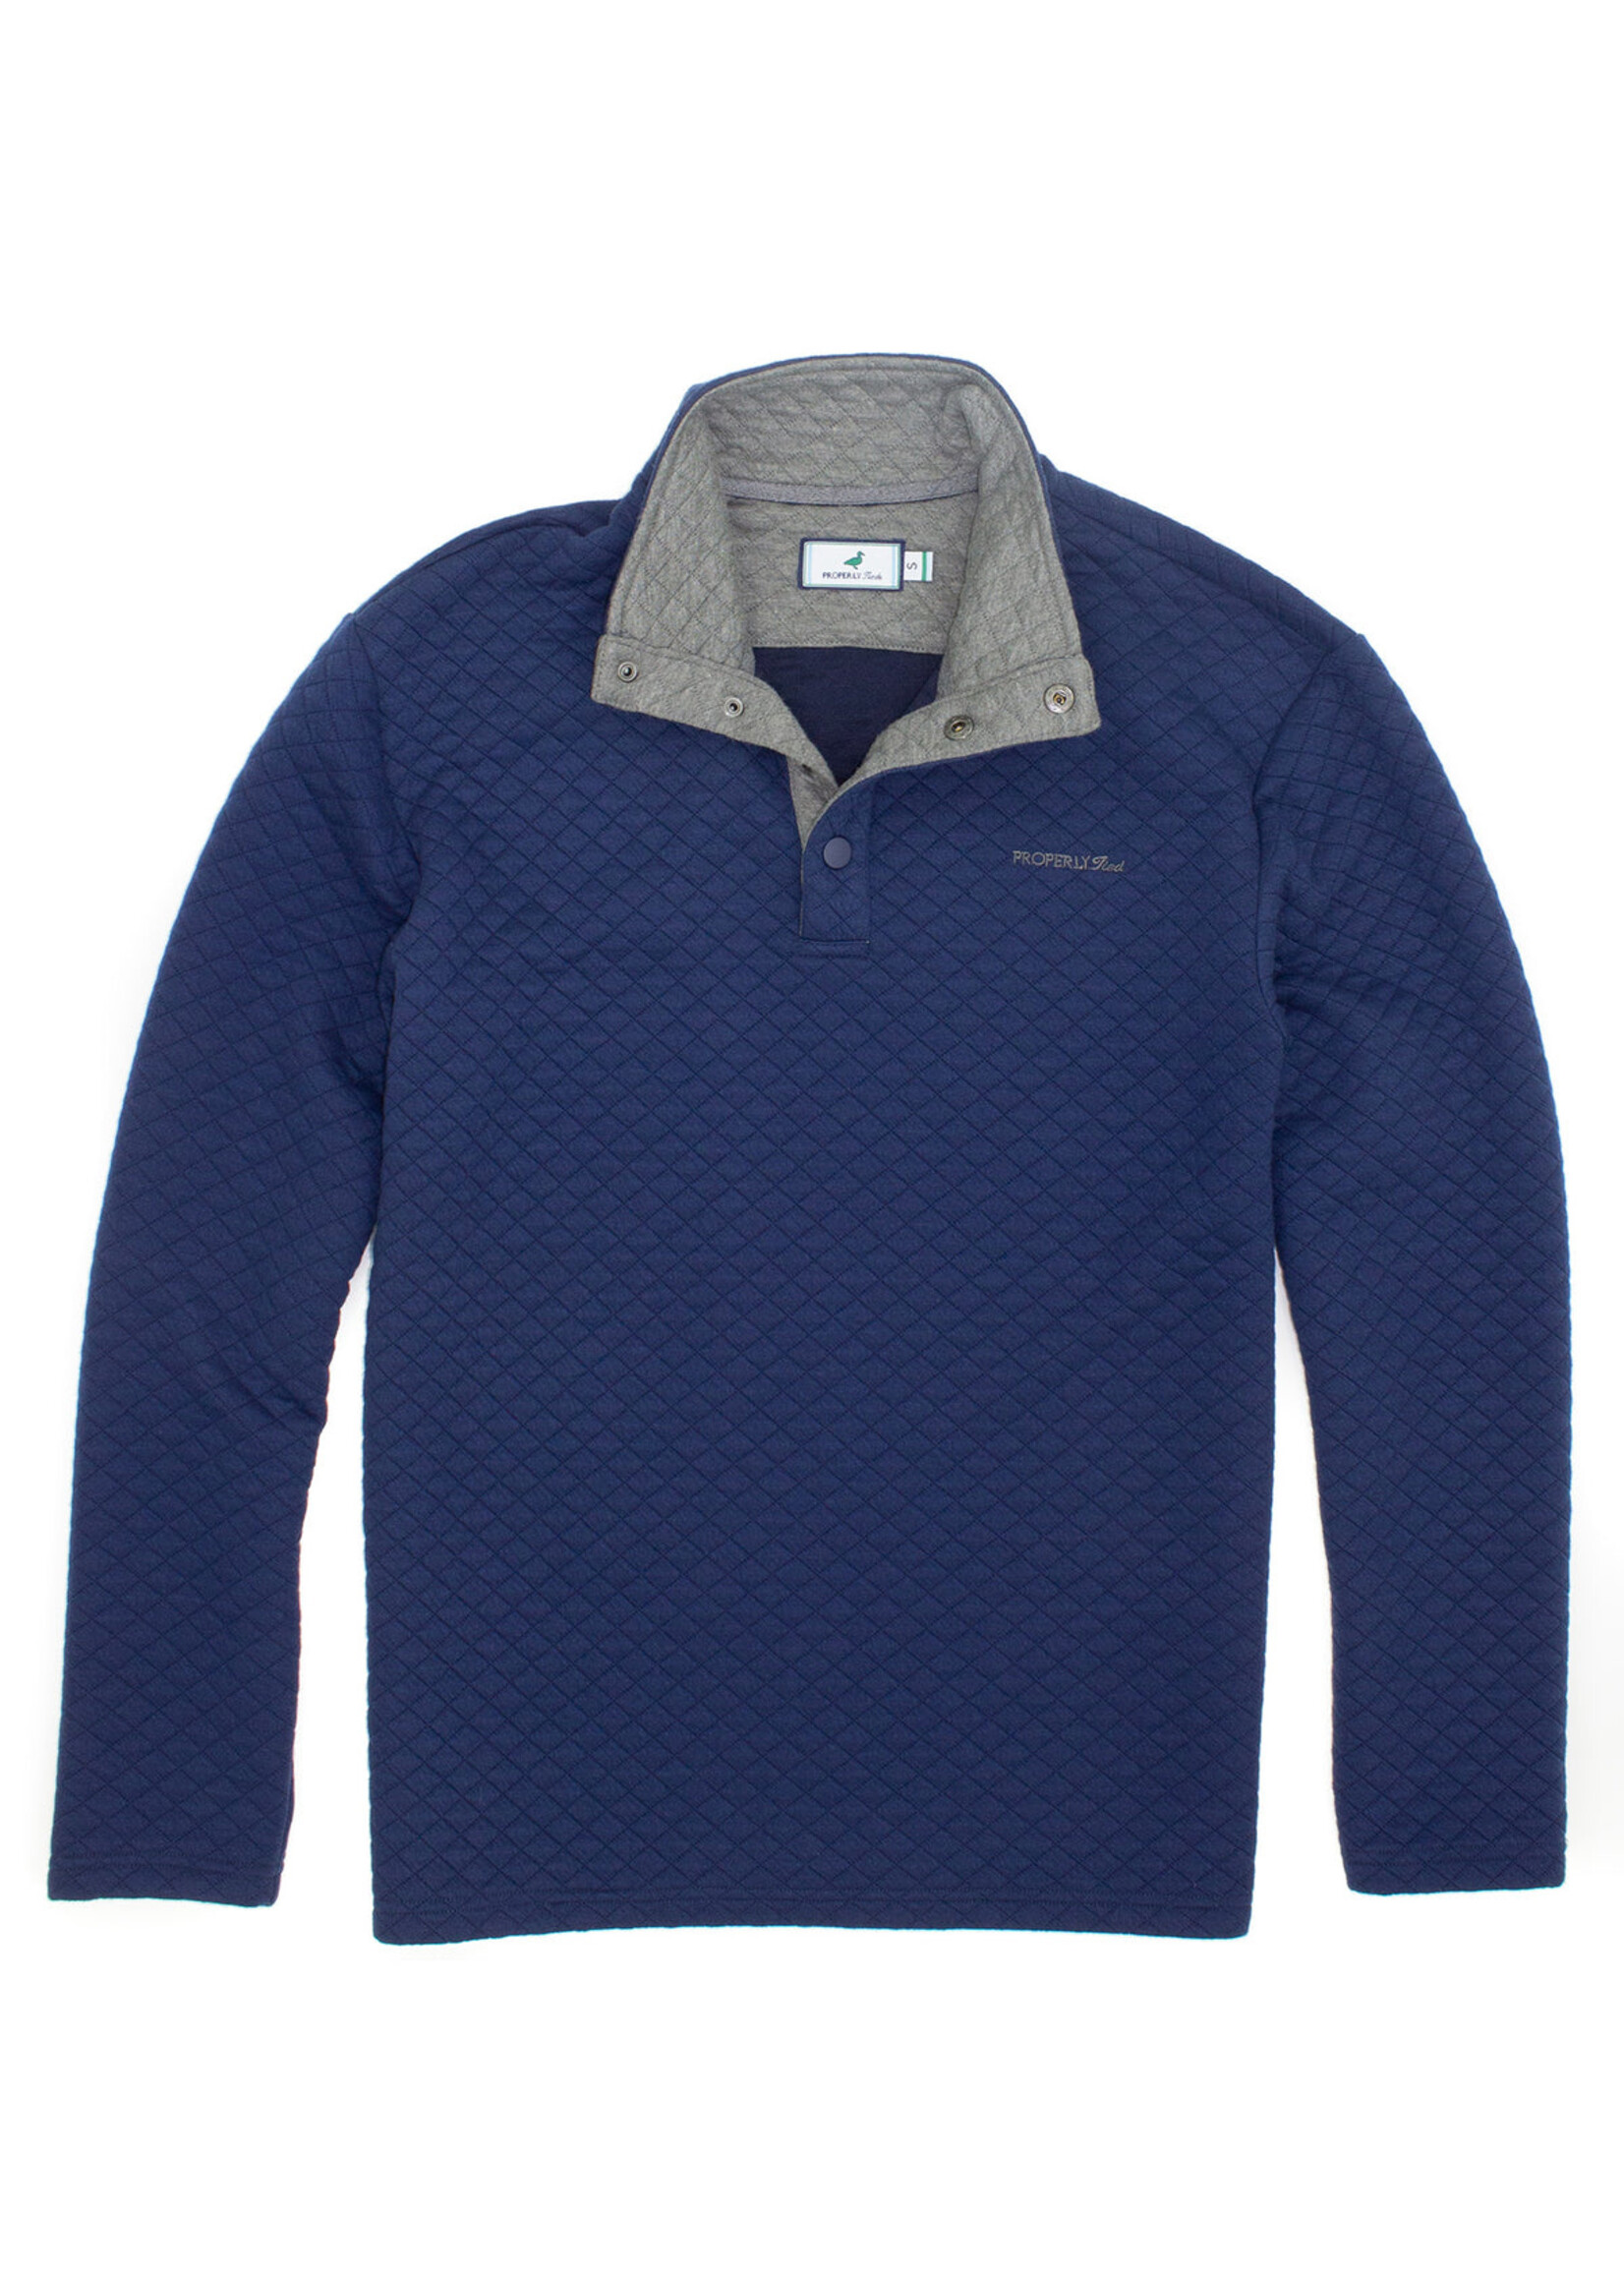 Properly Tied Club Pullover Navy